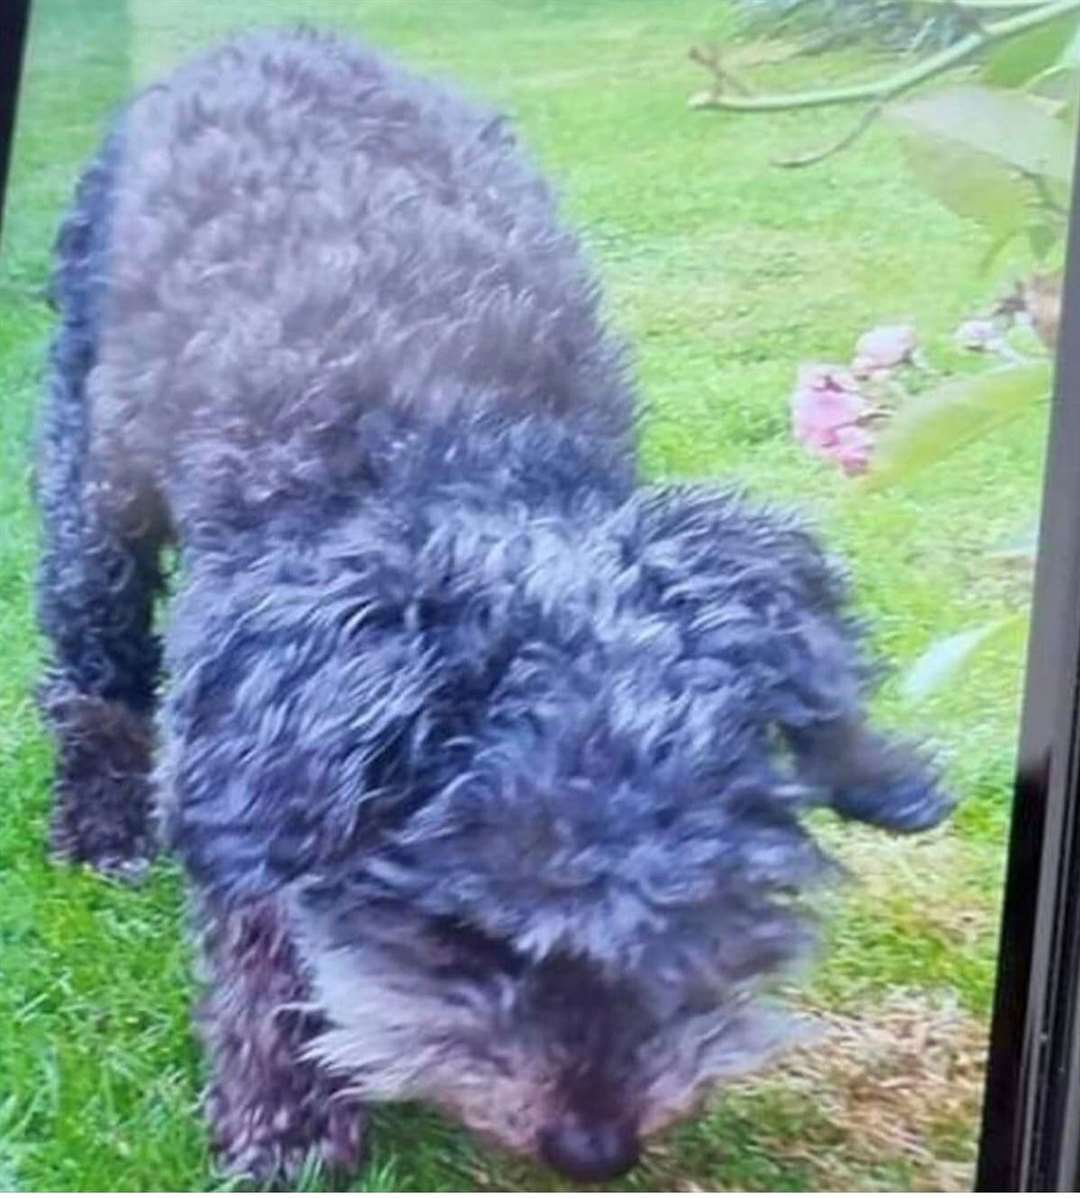 16-year-old blind Toy Poodle Lucinda has gone missing in Wye